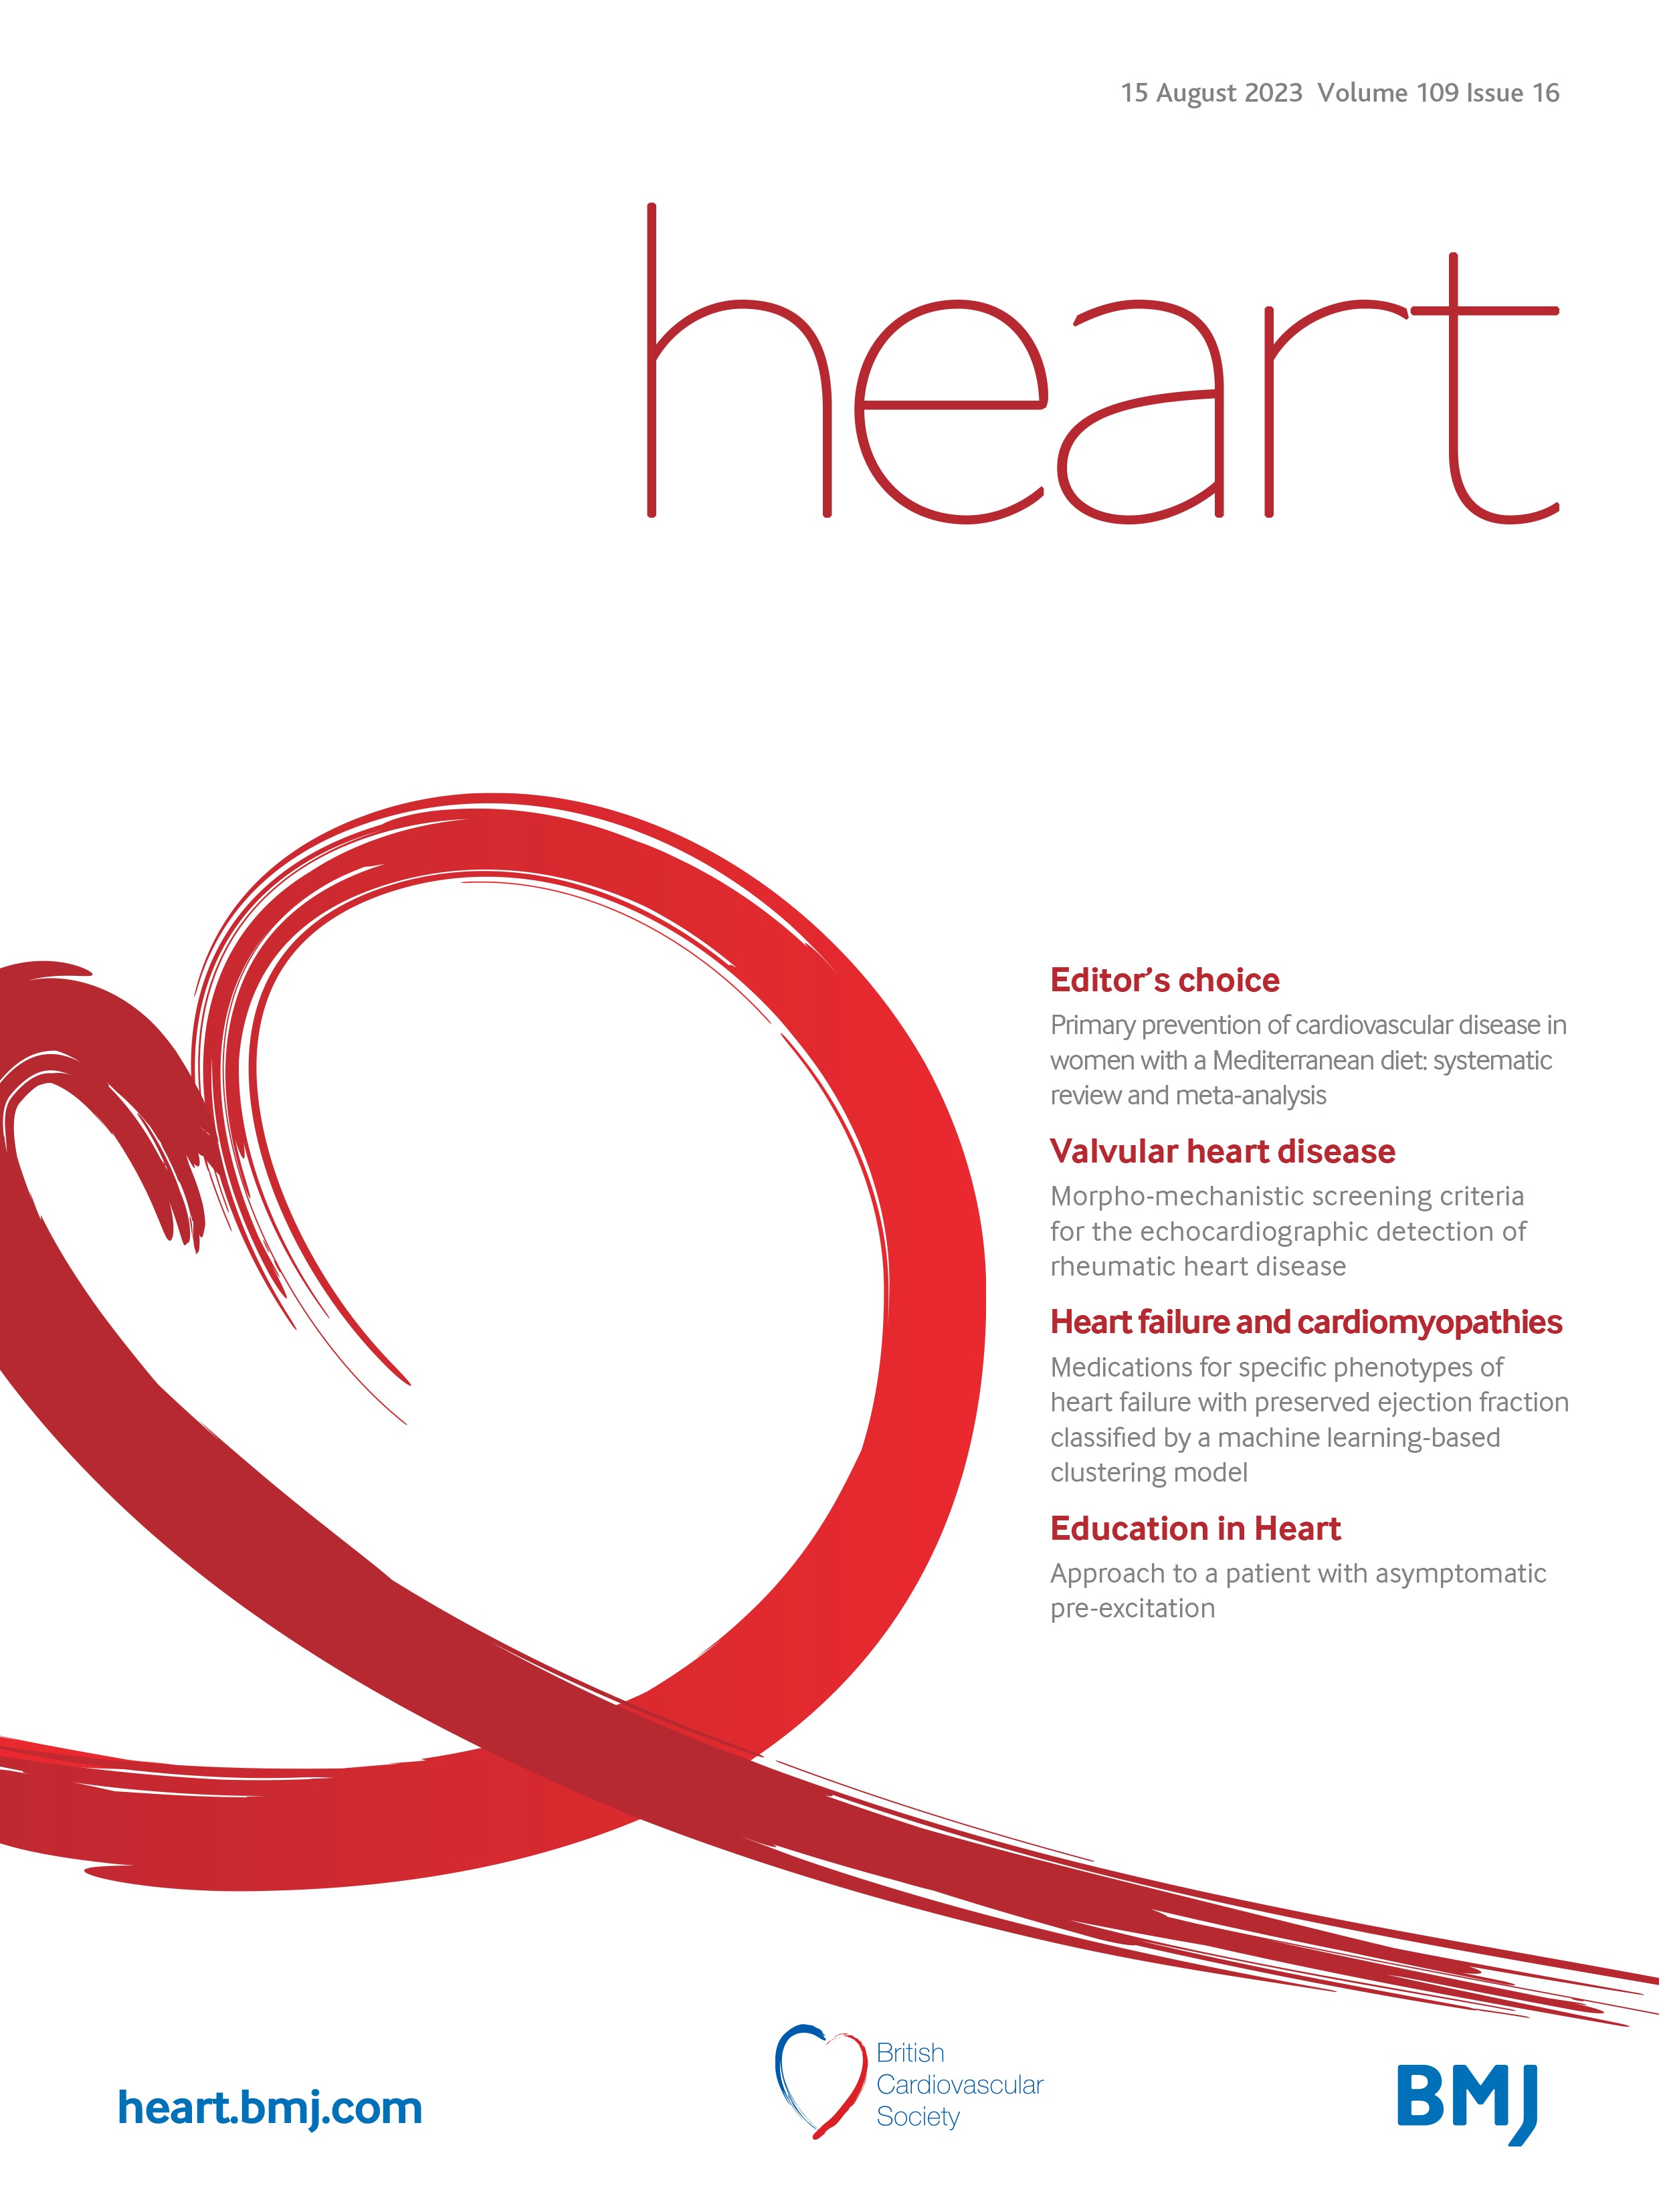 Will computerised medical records and statistical tools really help us move towards precision medicine of heart failure with preserved ejection fraction?